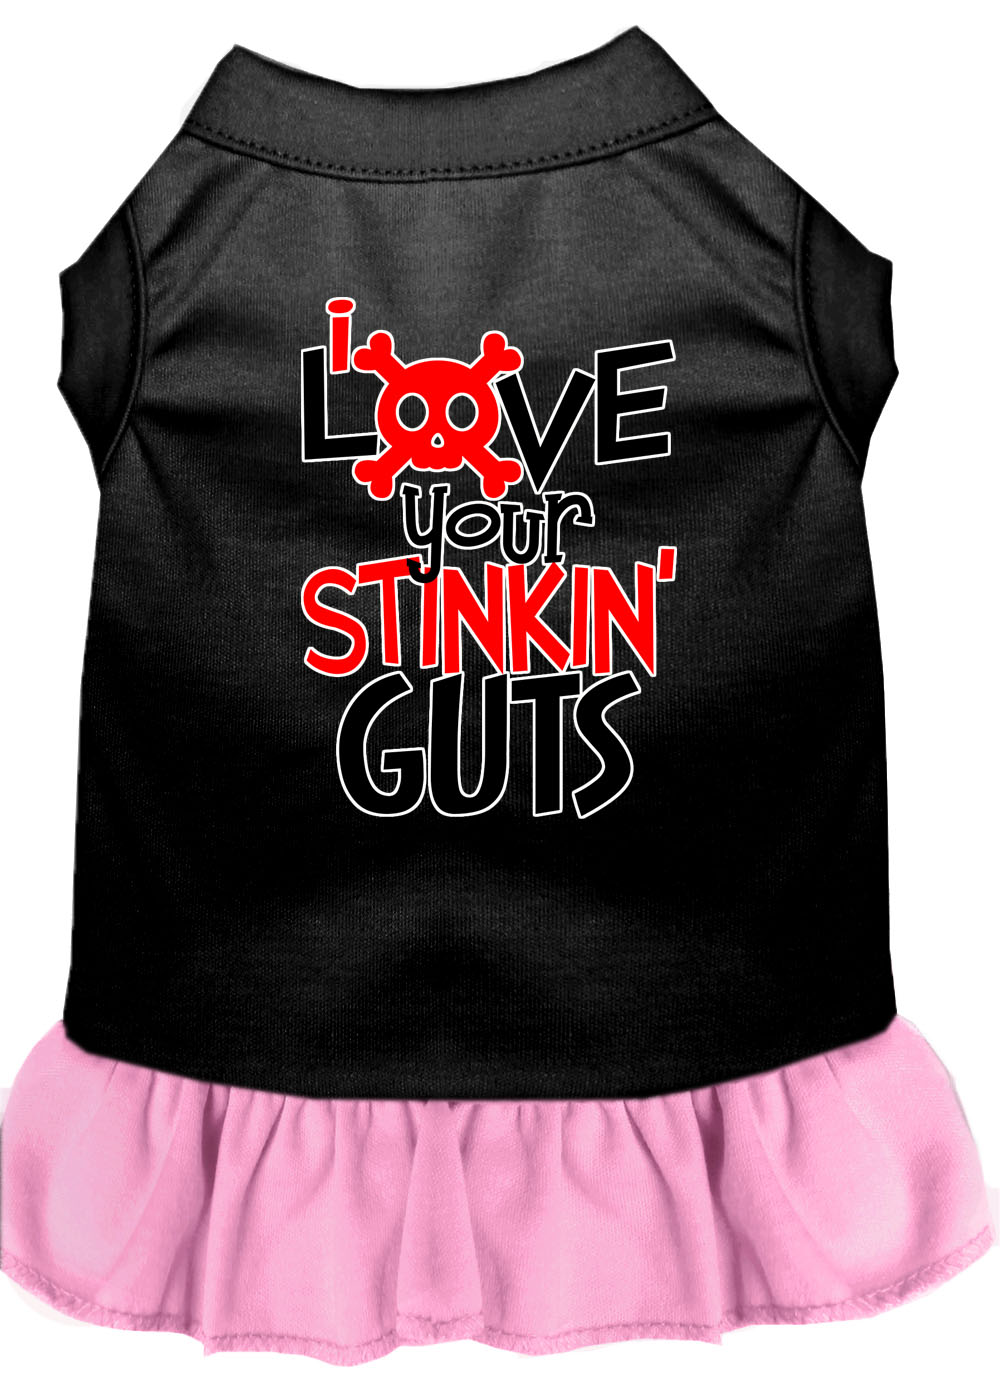 Love your Stinkin Guts Screen Print Dog Dress Black with Light Pink Med